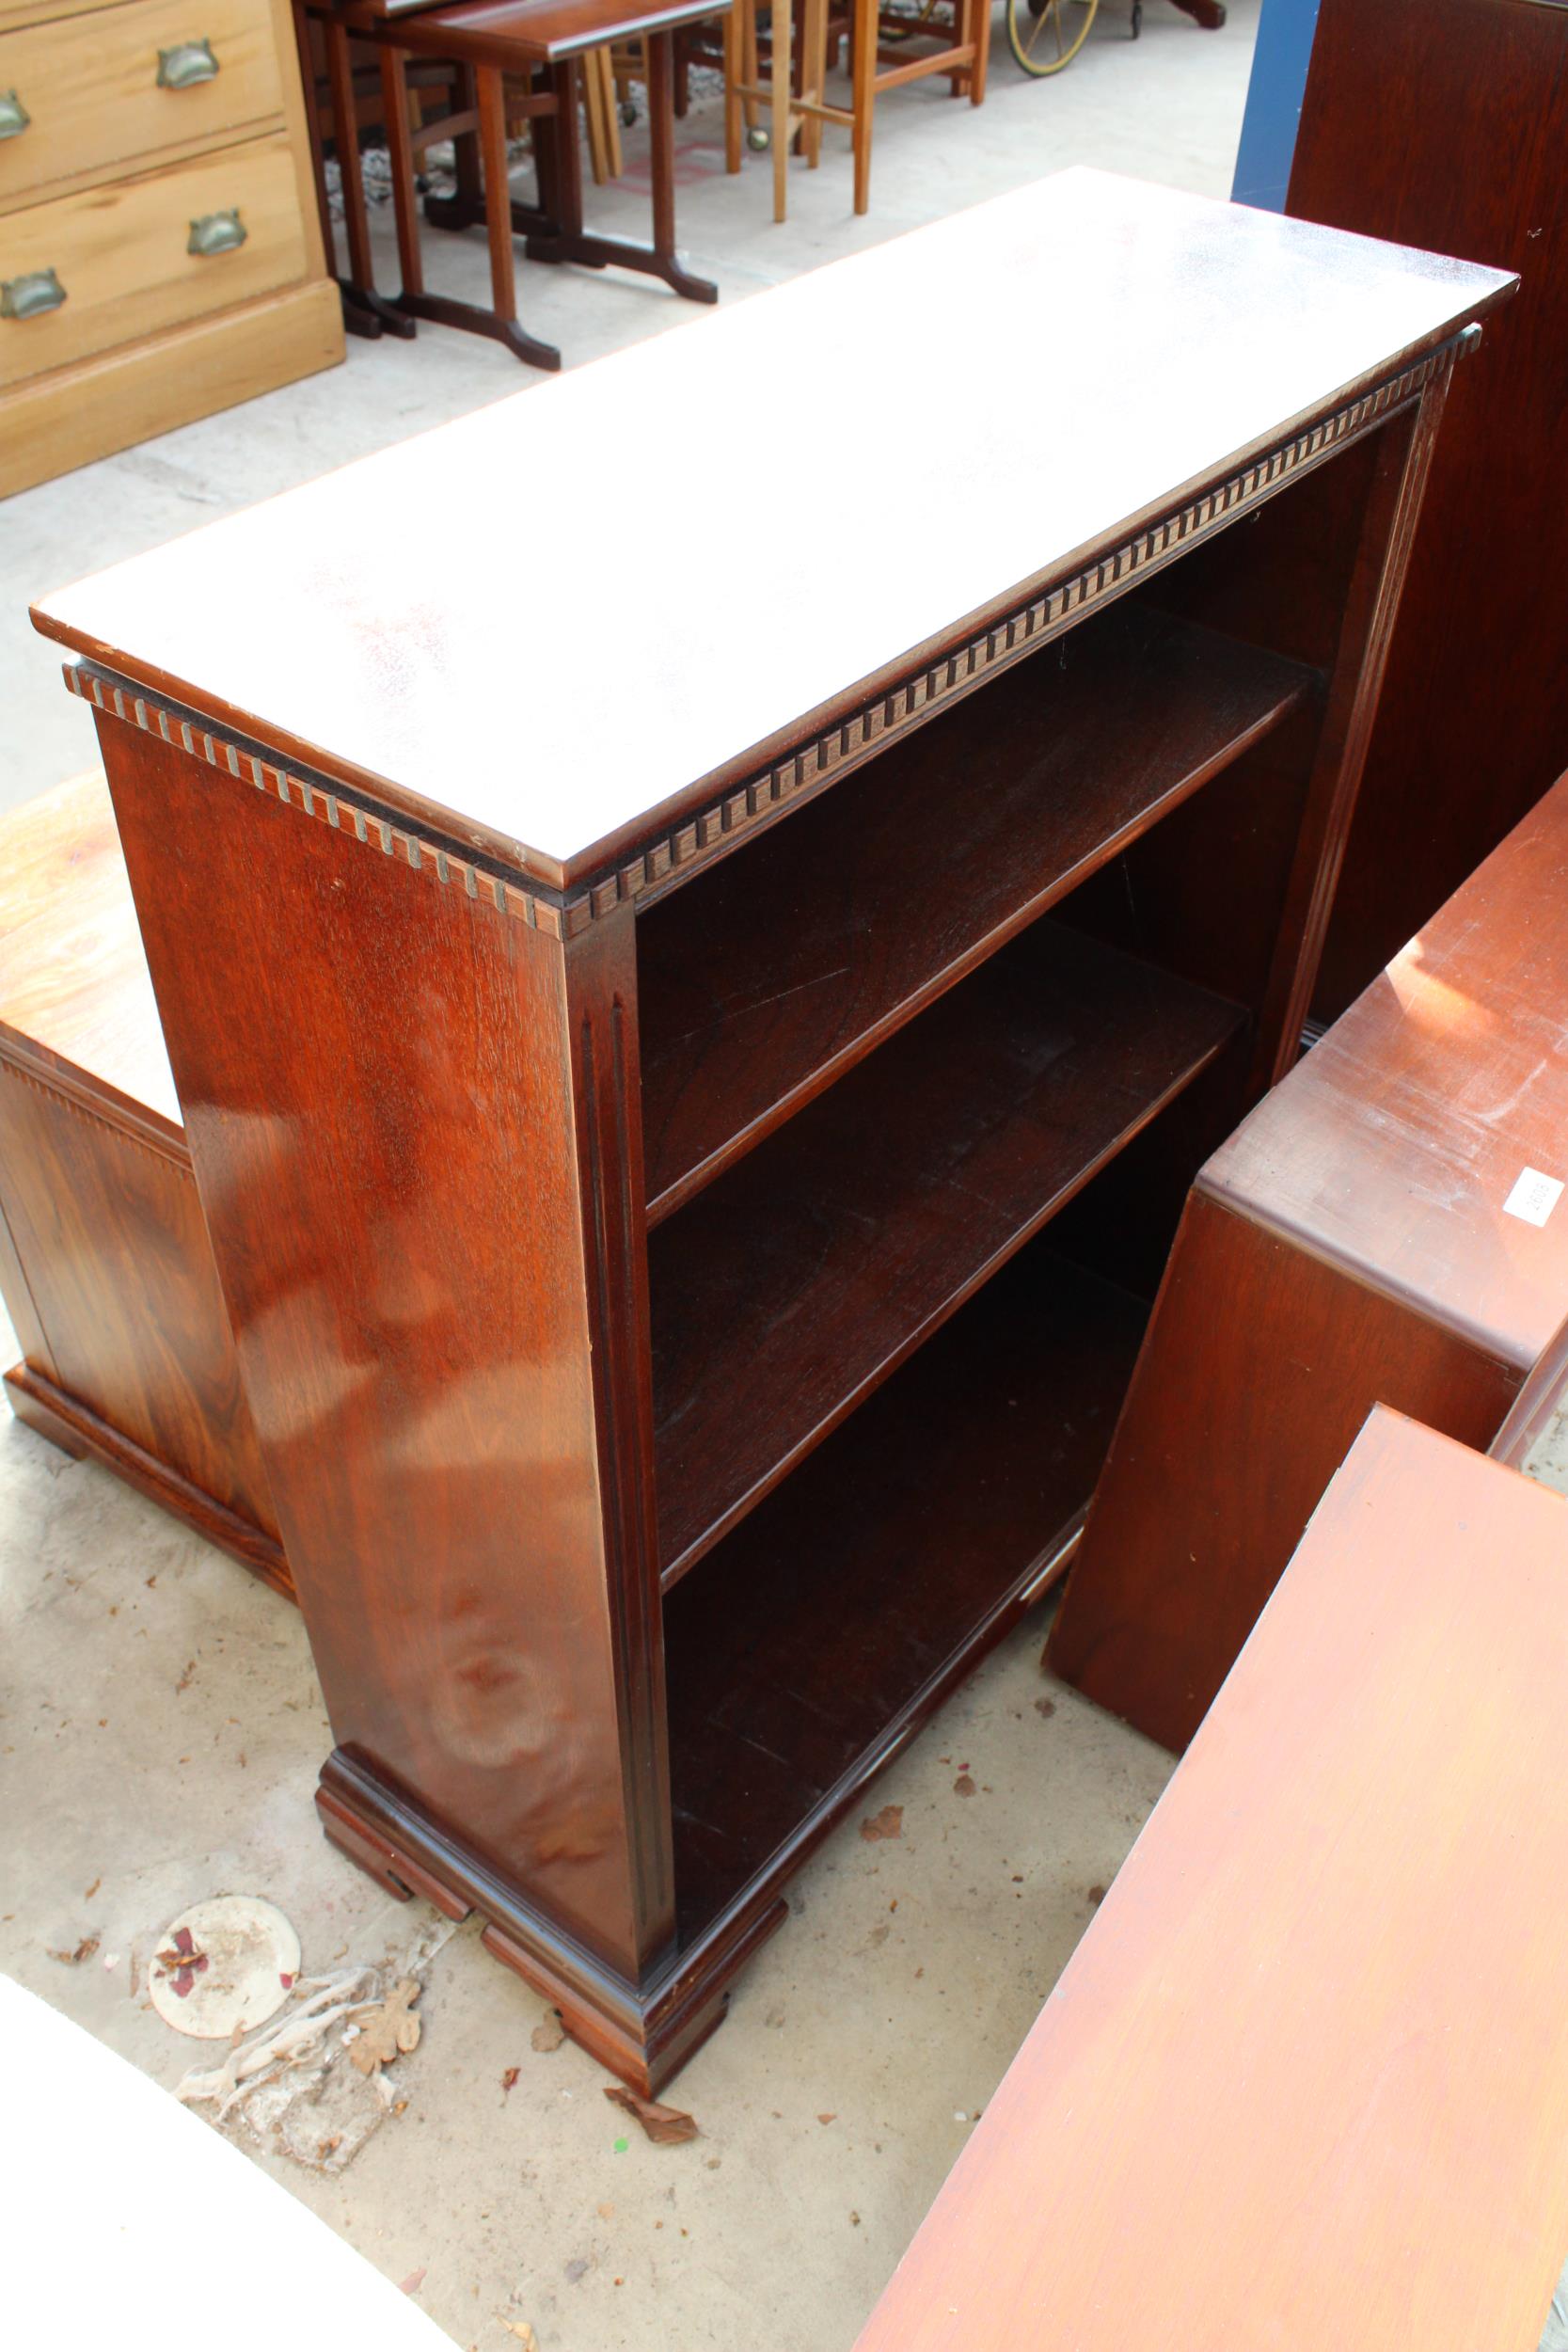 AN OPEN MAHOGANY BOOKCASE AND TWO SMALL SHELVES - Image 3 of 3